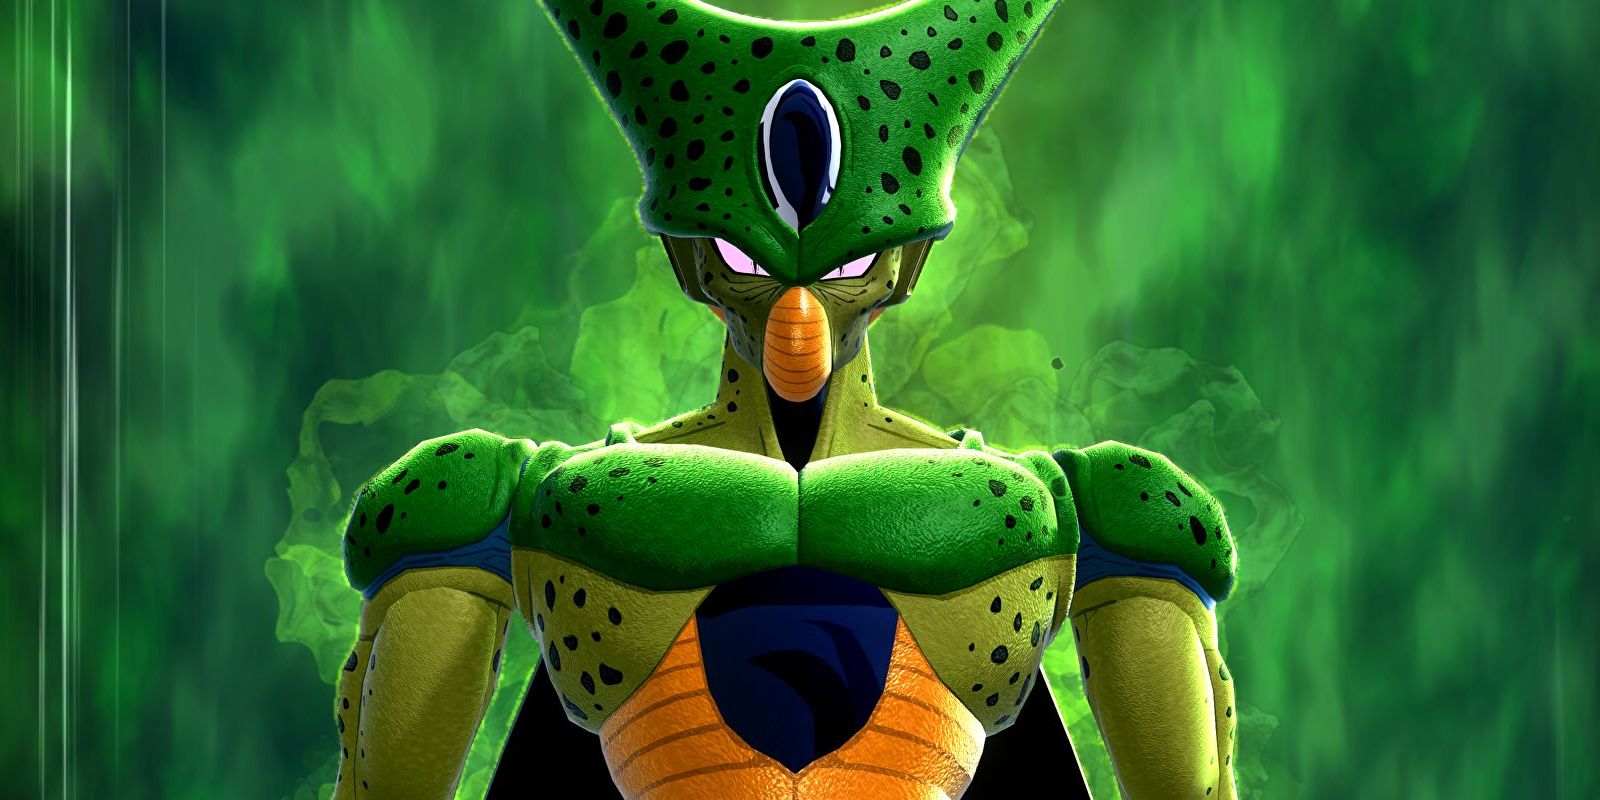 Cell's first form in Dragon Ball: The Breakers